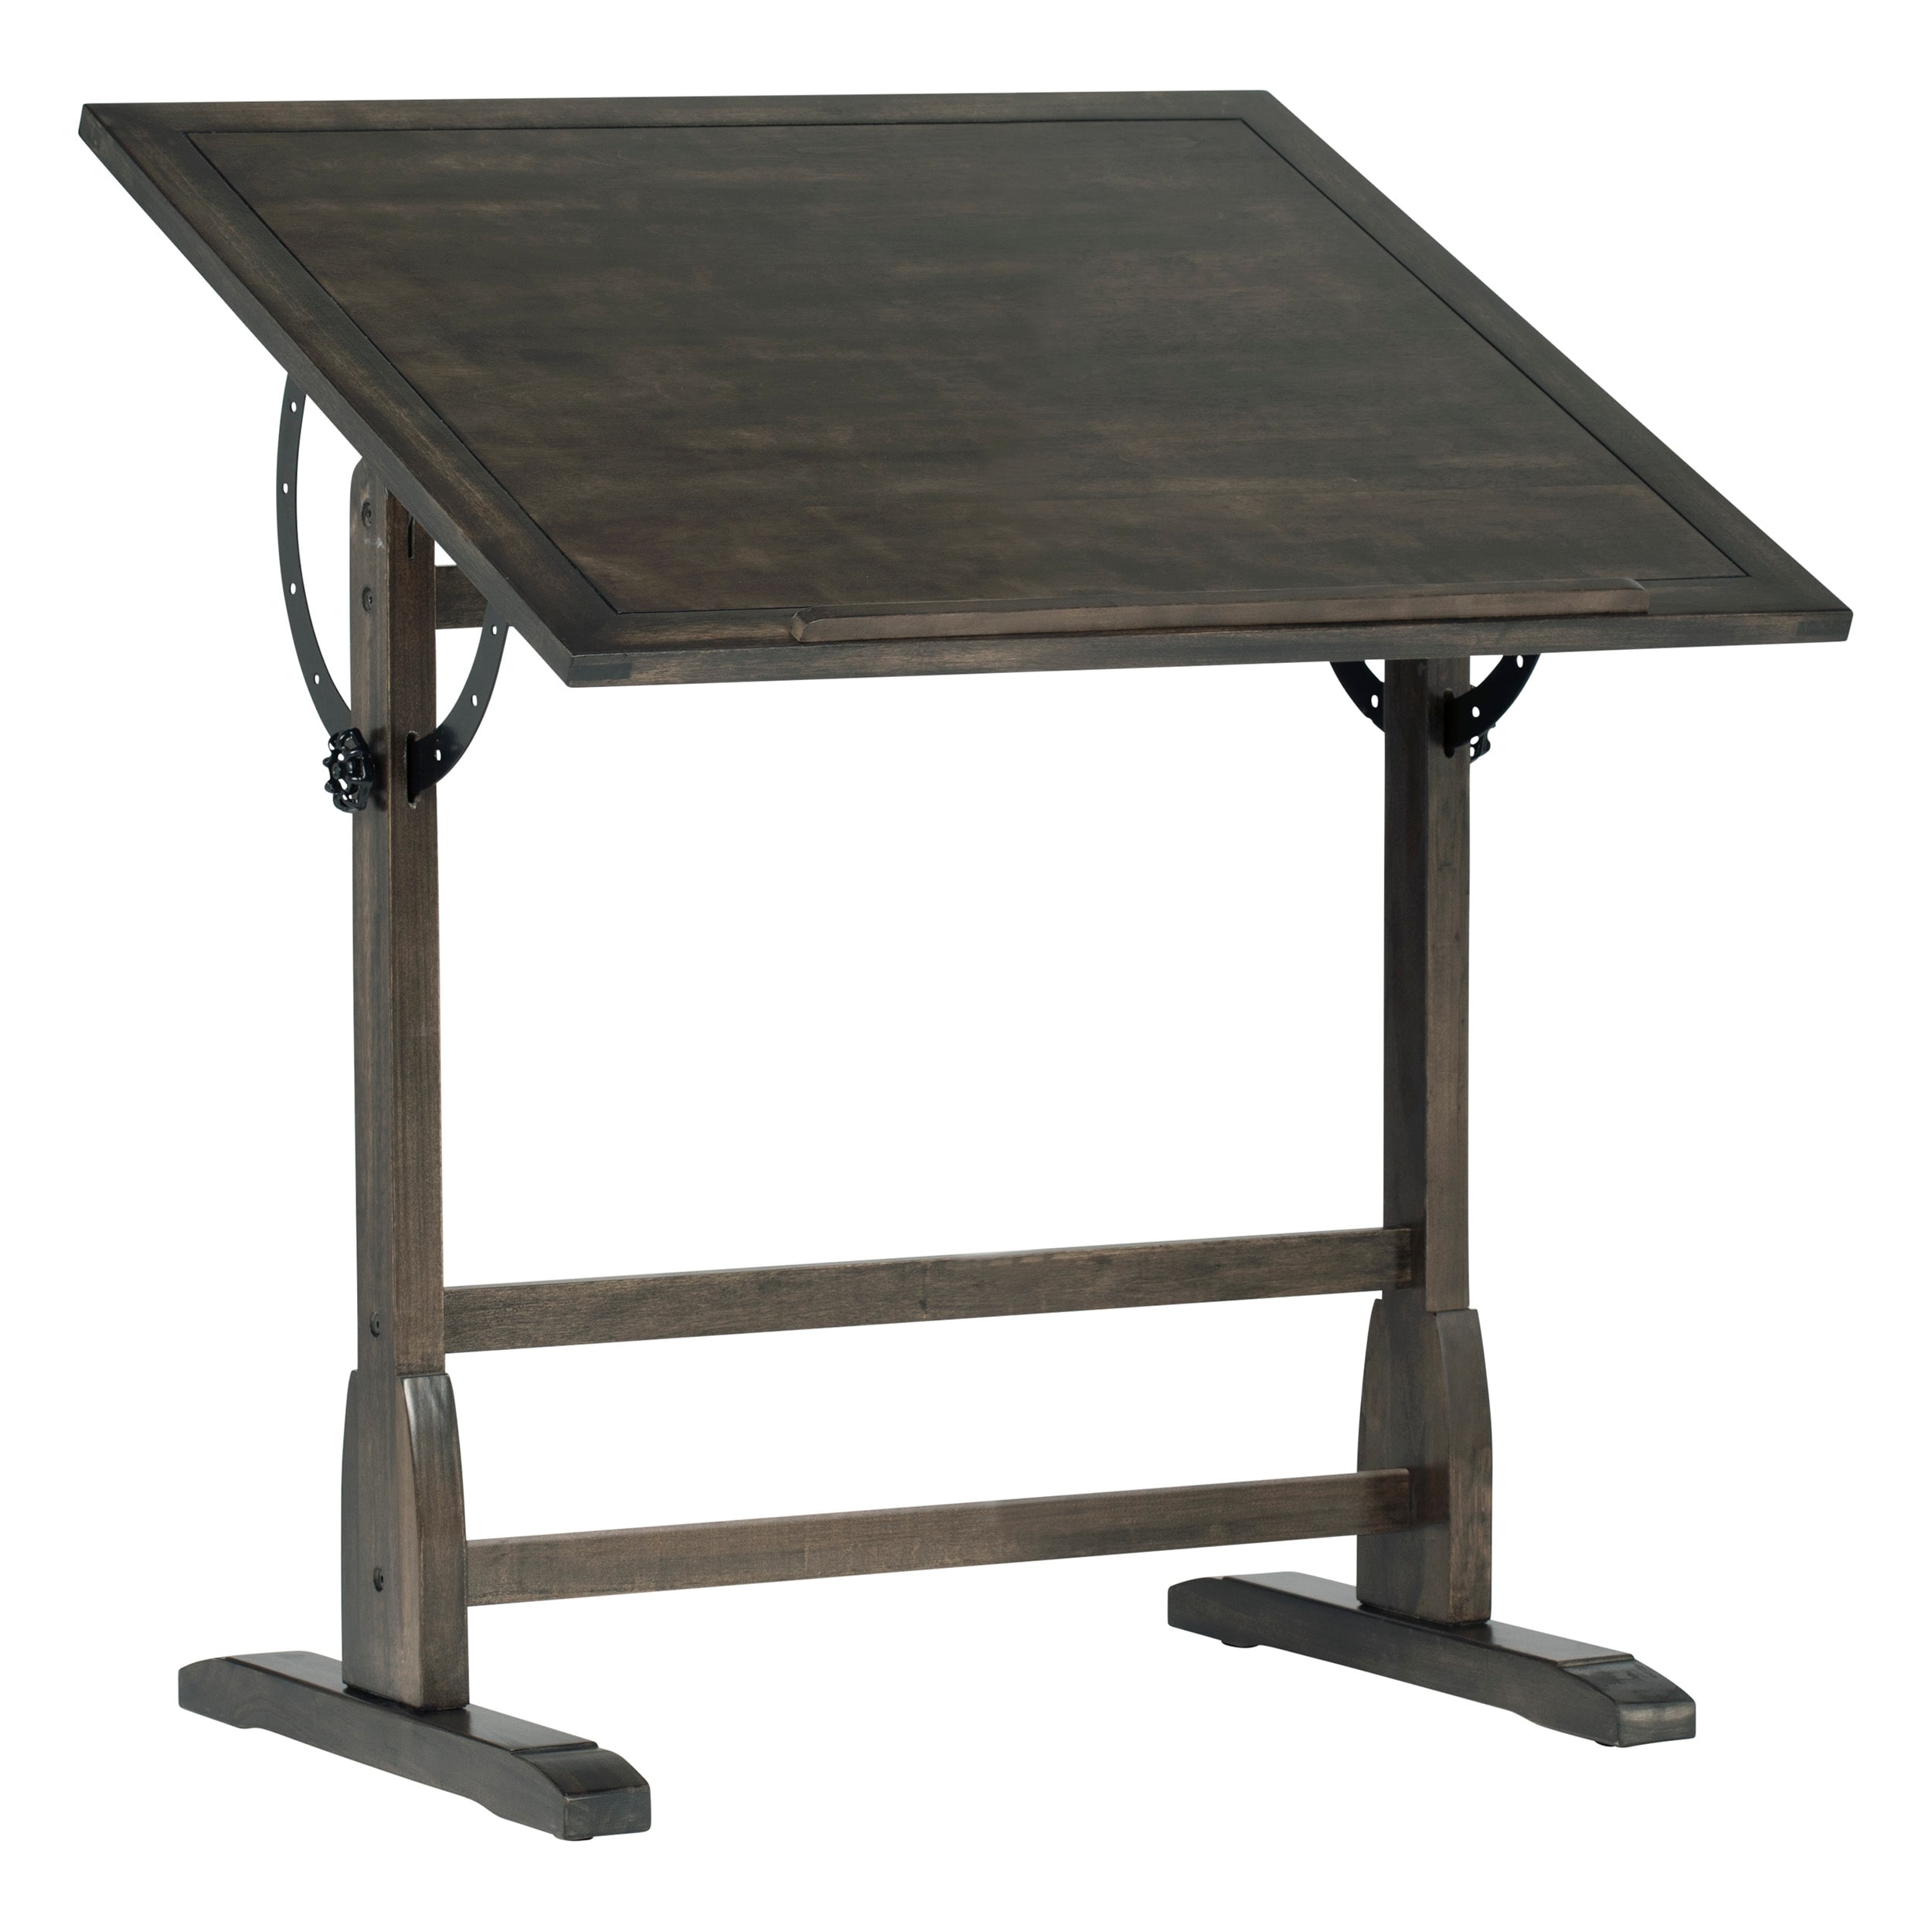 Sewing and Crafting Tables - Bed Bath & Beyond